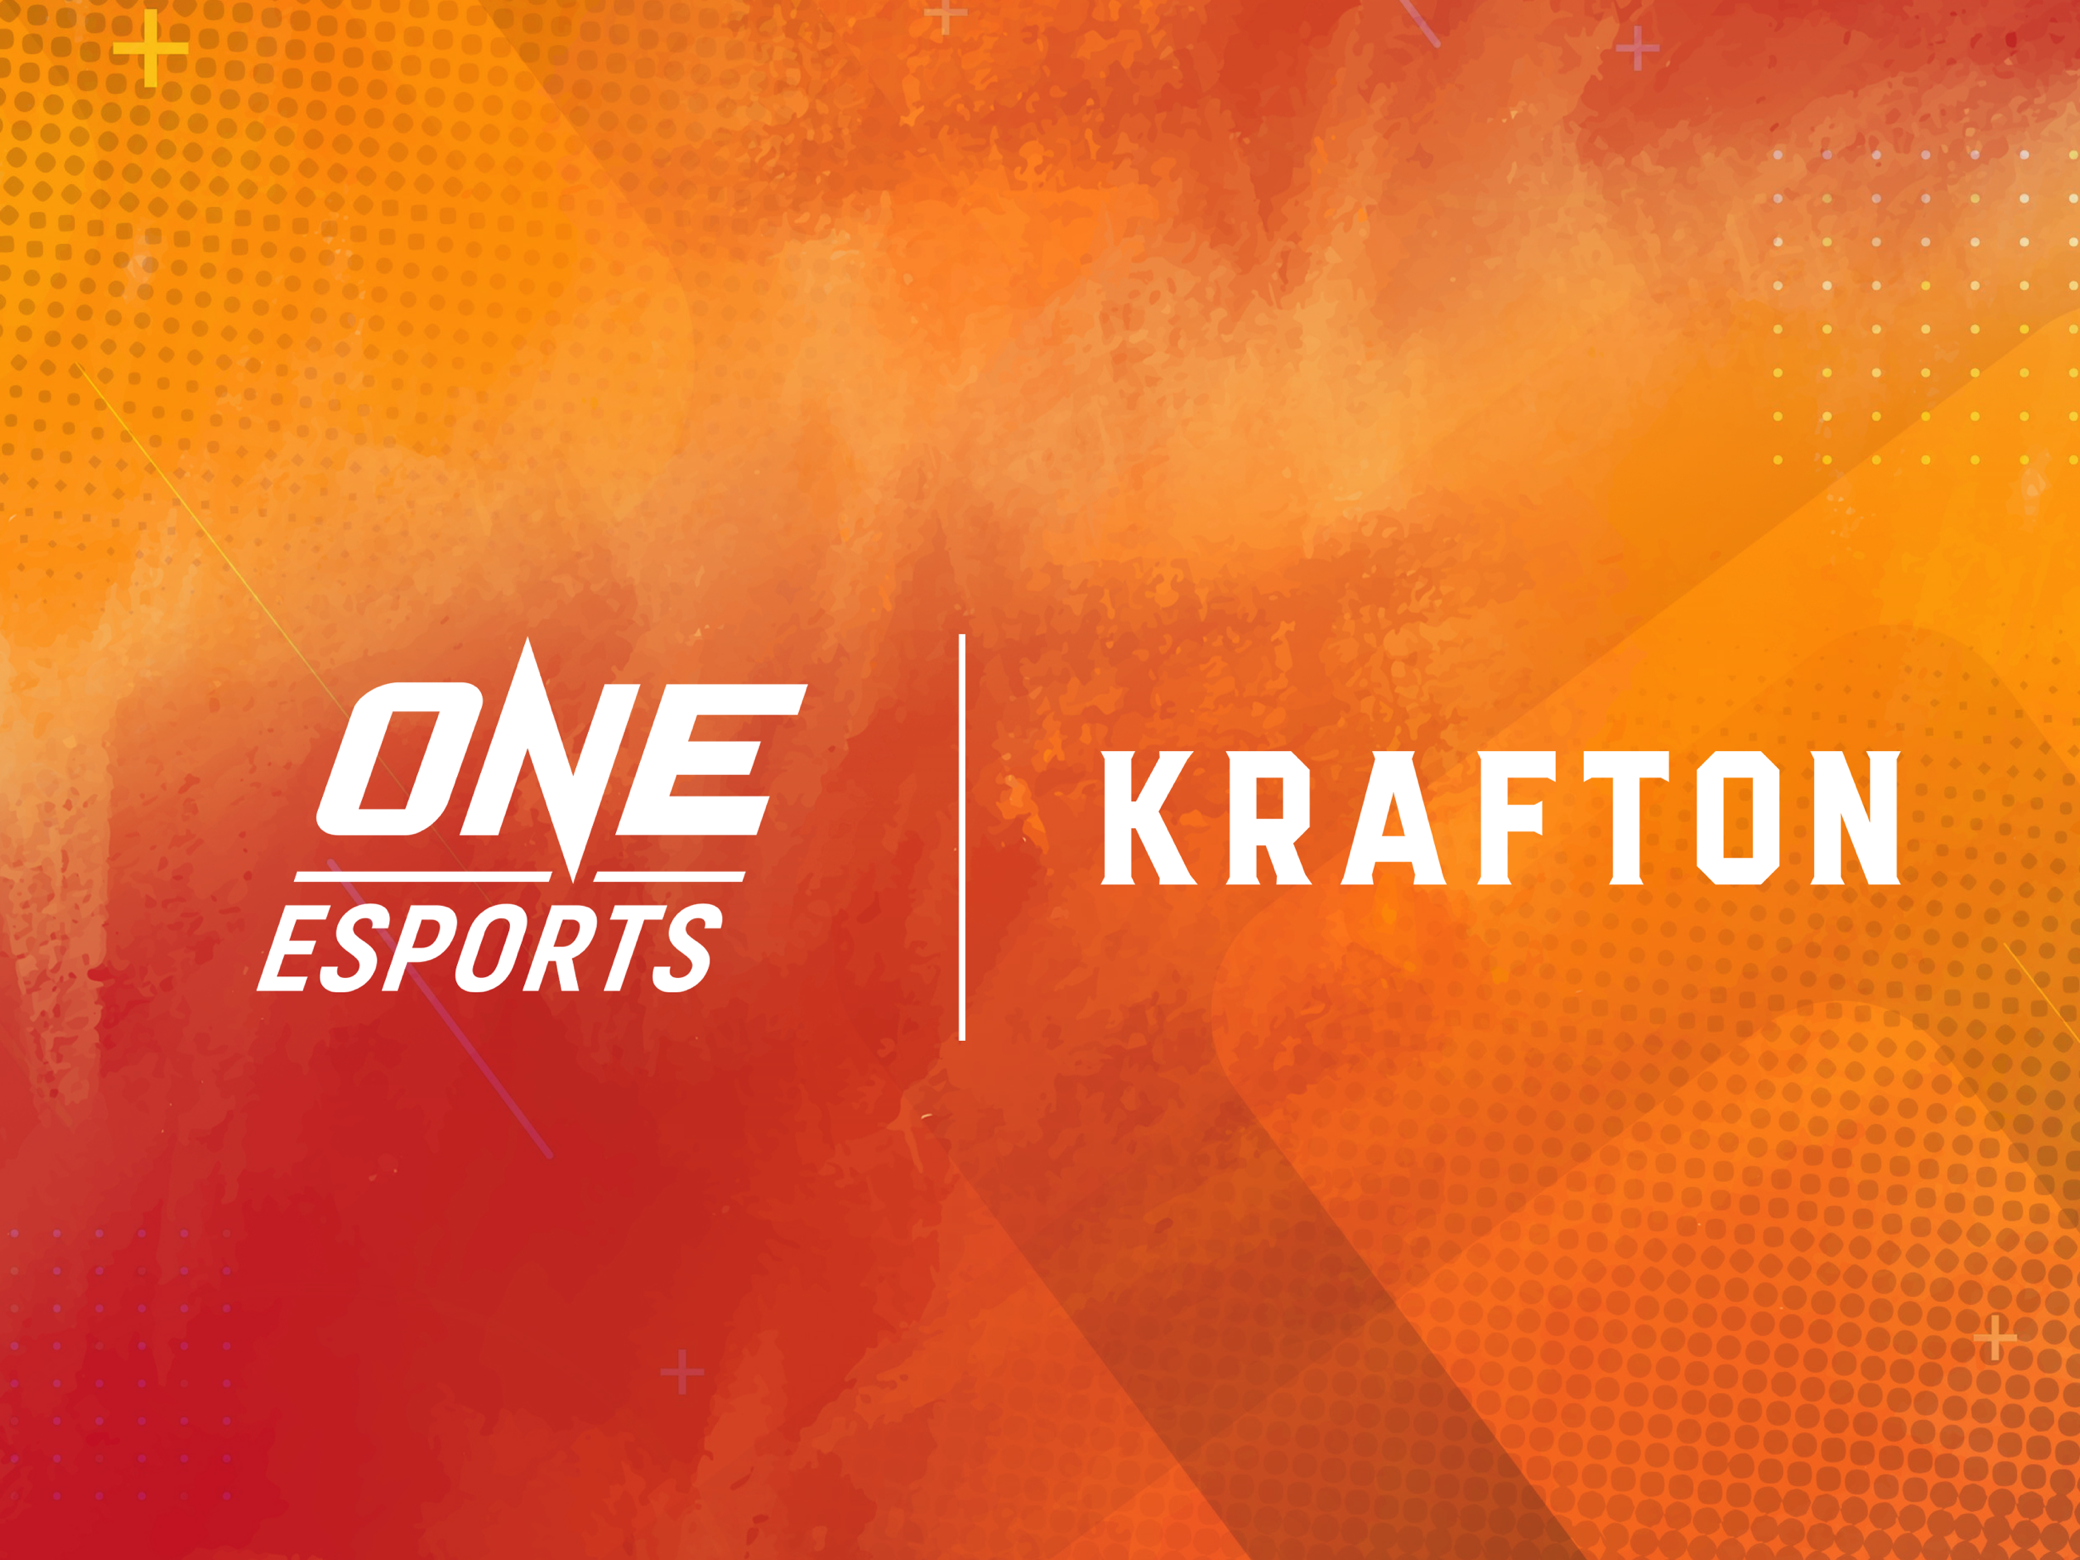 ONE Esports (@oneesports) • Instagram photos and videos